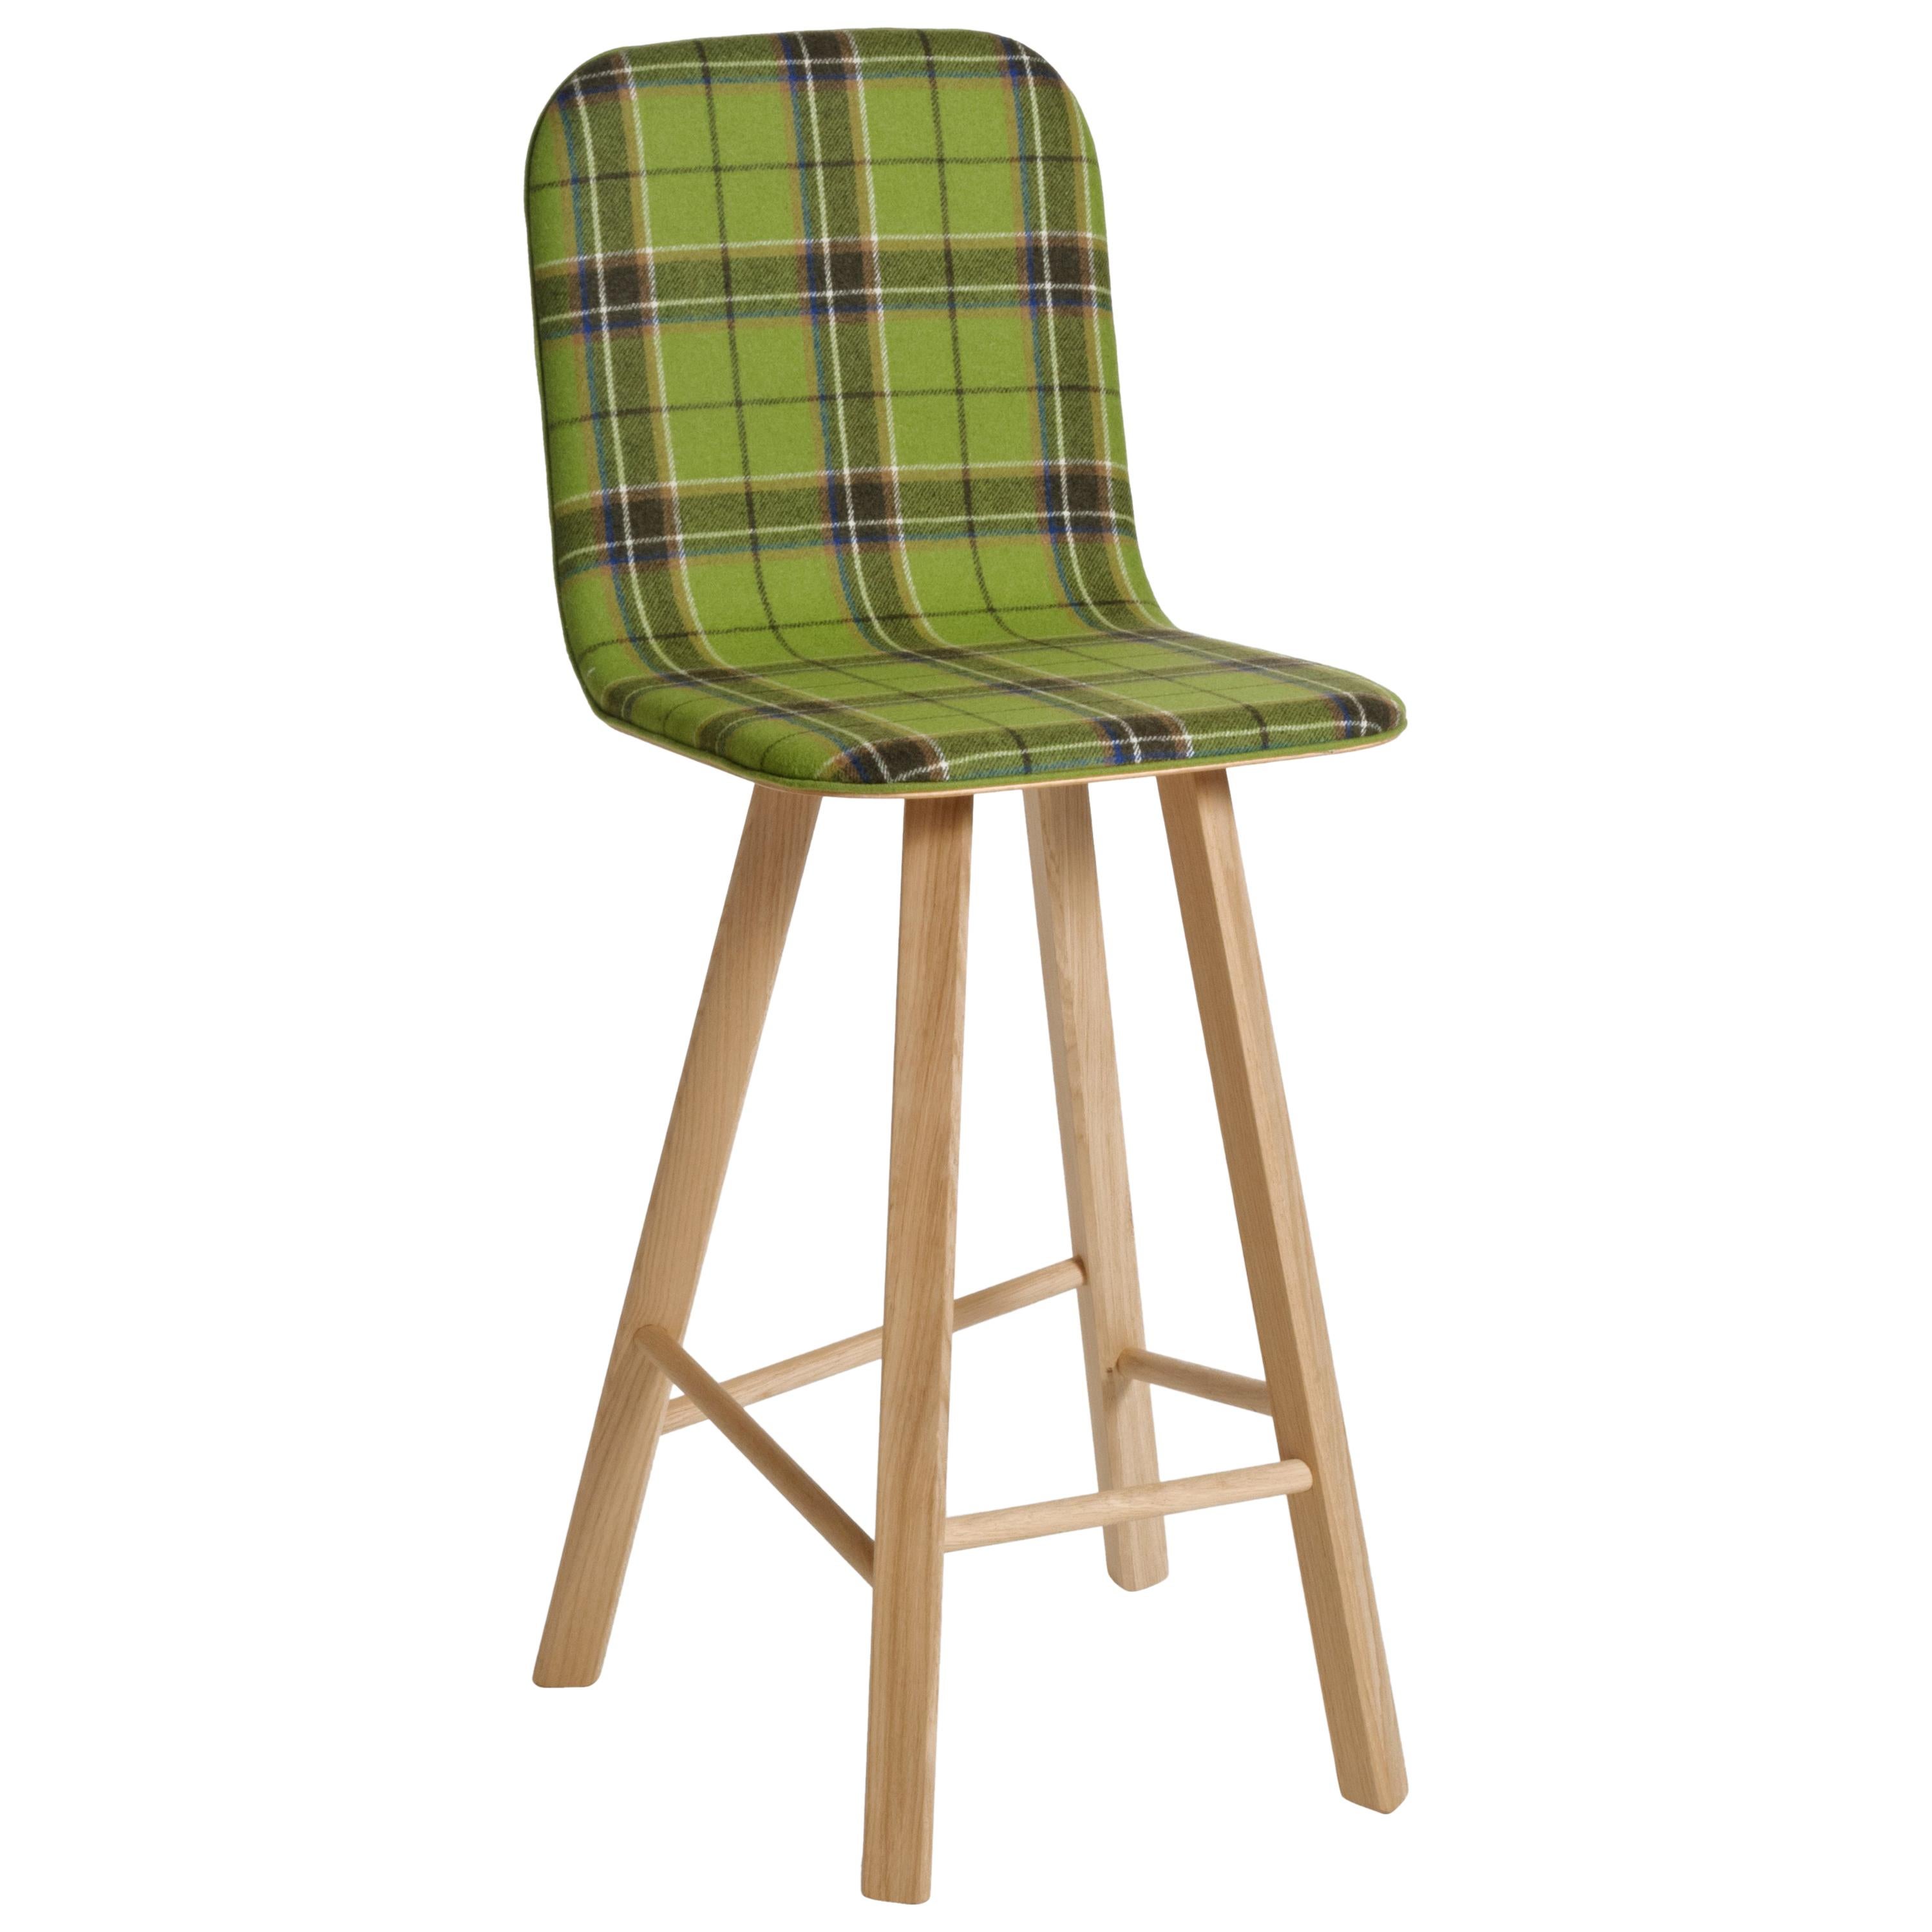 Tria Stool HB Tartan by Colé, Minimalist Design Icon Inspired to Graphic Art